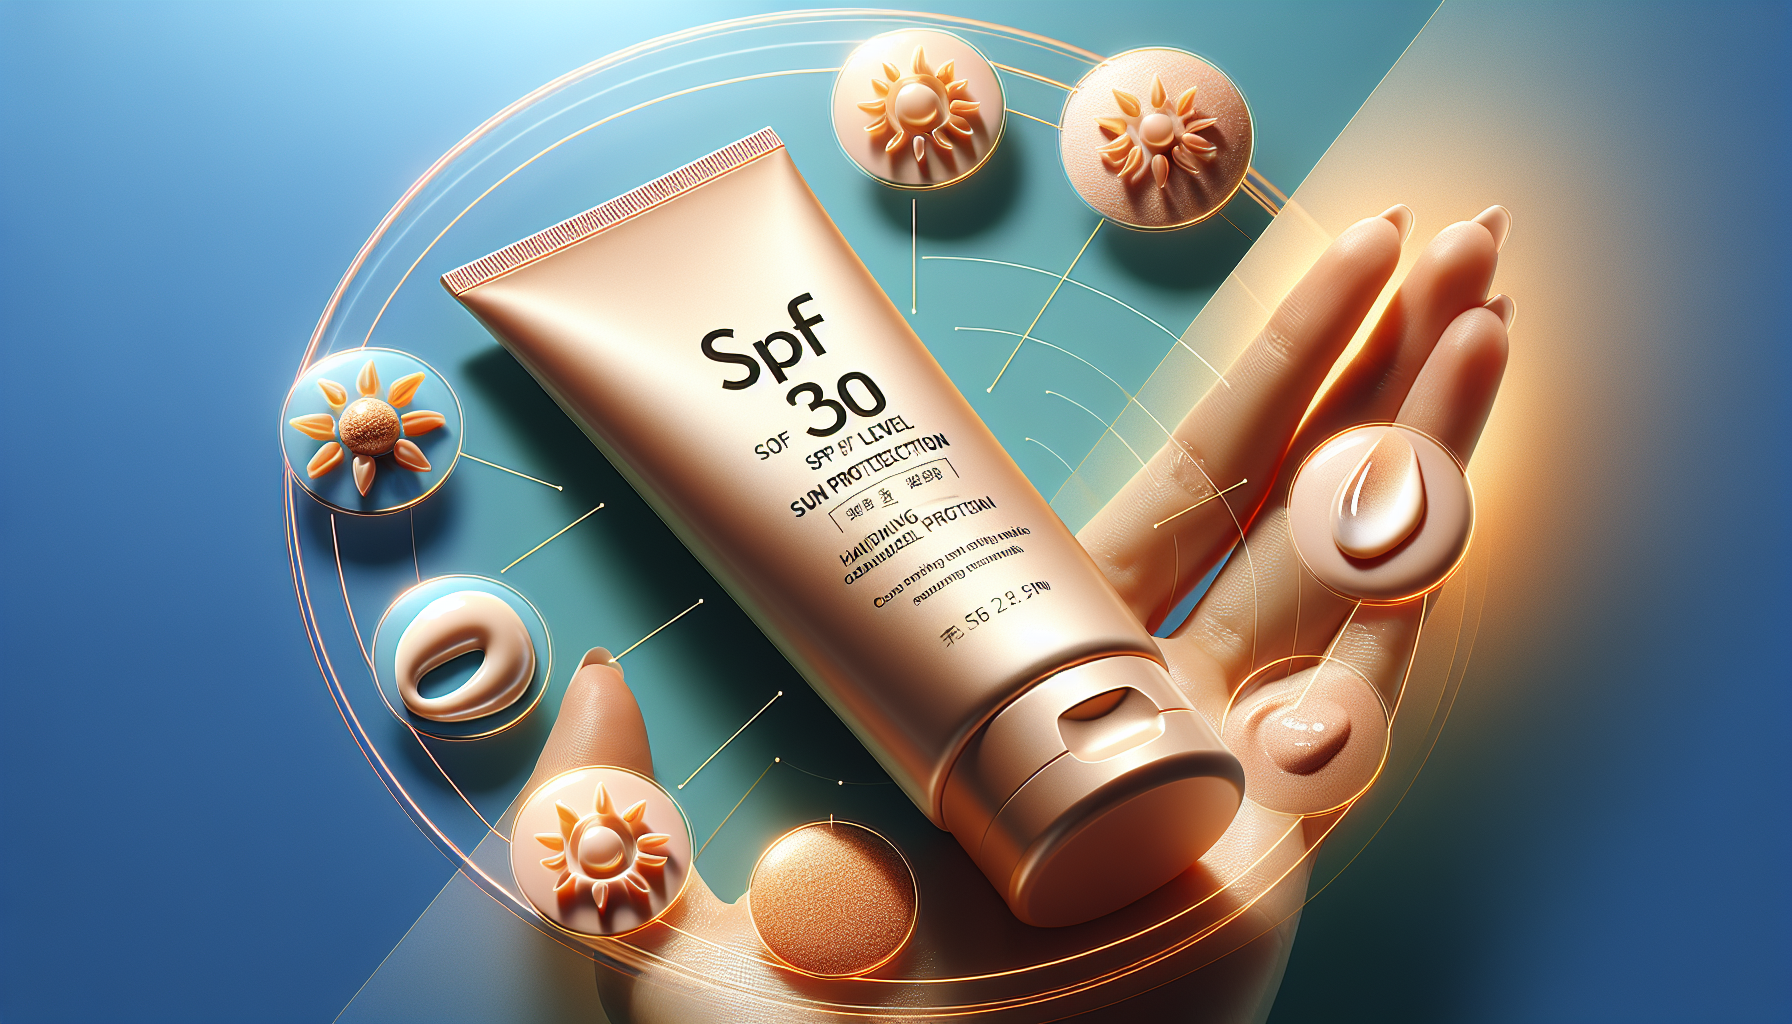 What SPF Level Is Necessary For Adequate Sun Protection In Daily Skincare Routines?